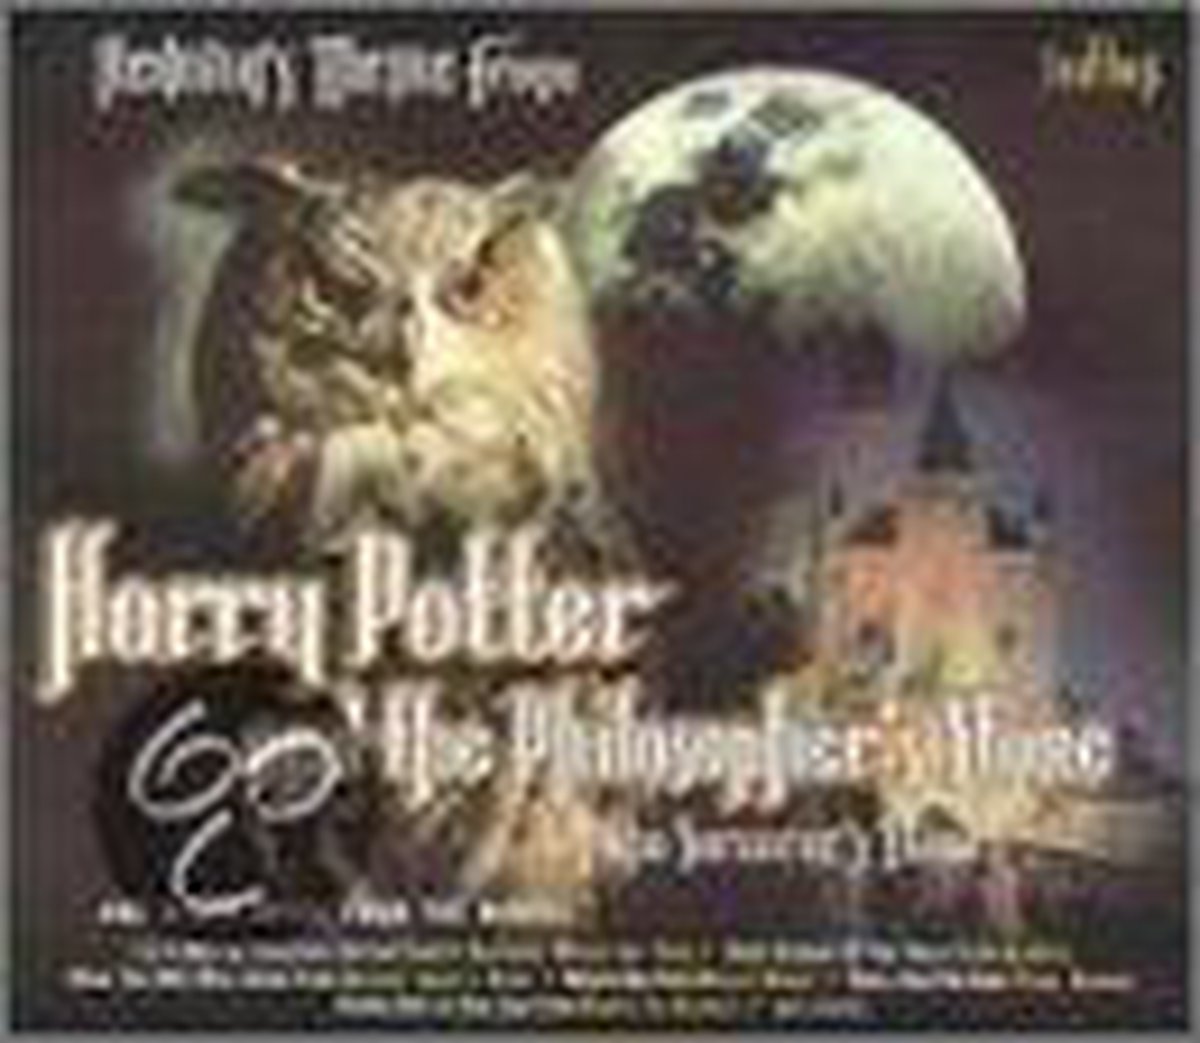 Harry Potter And The Philosopher's Stone And Other Movie Hits - various artists